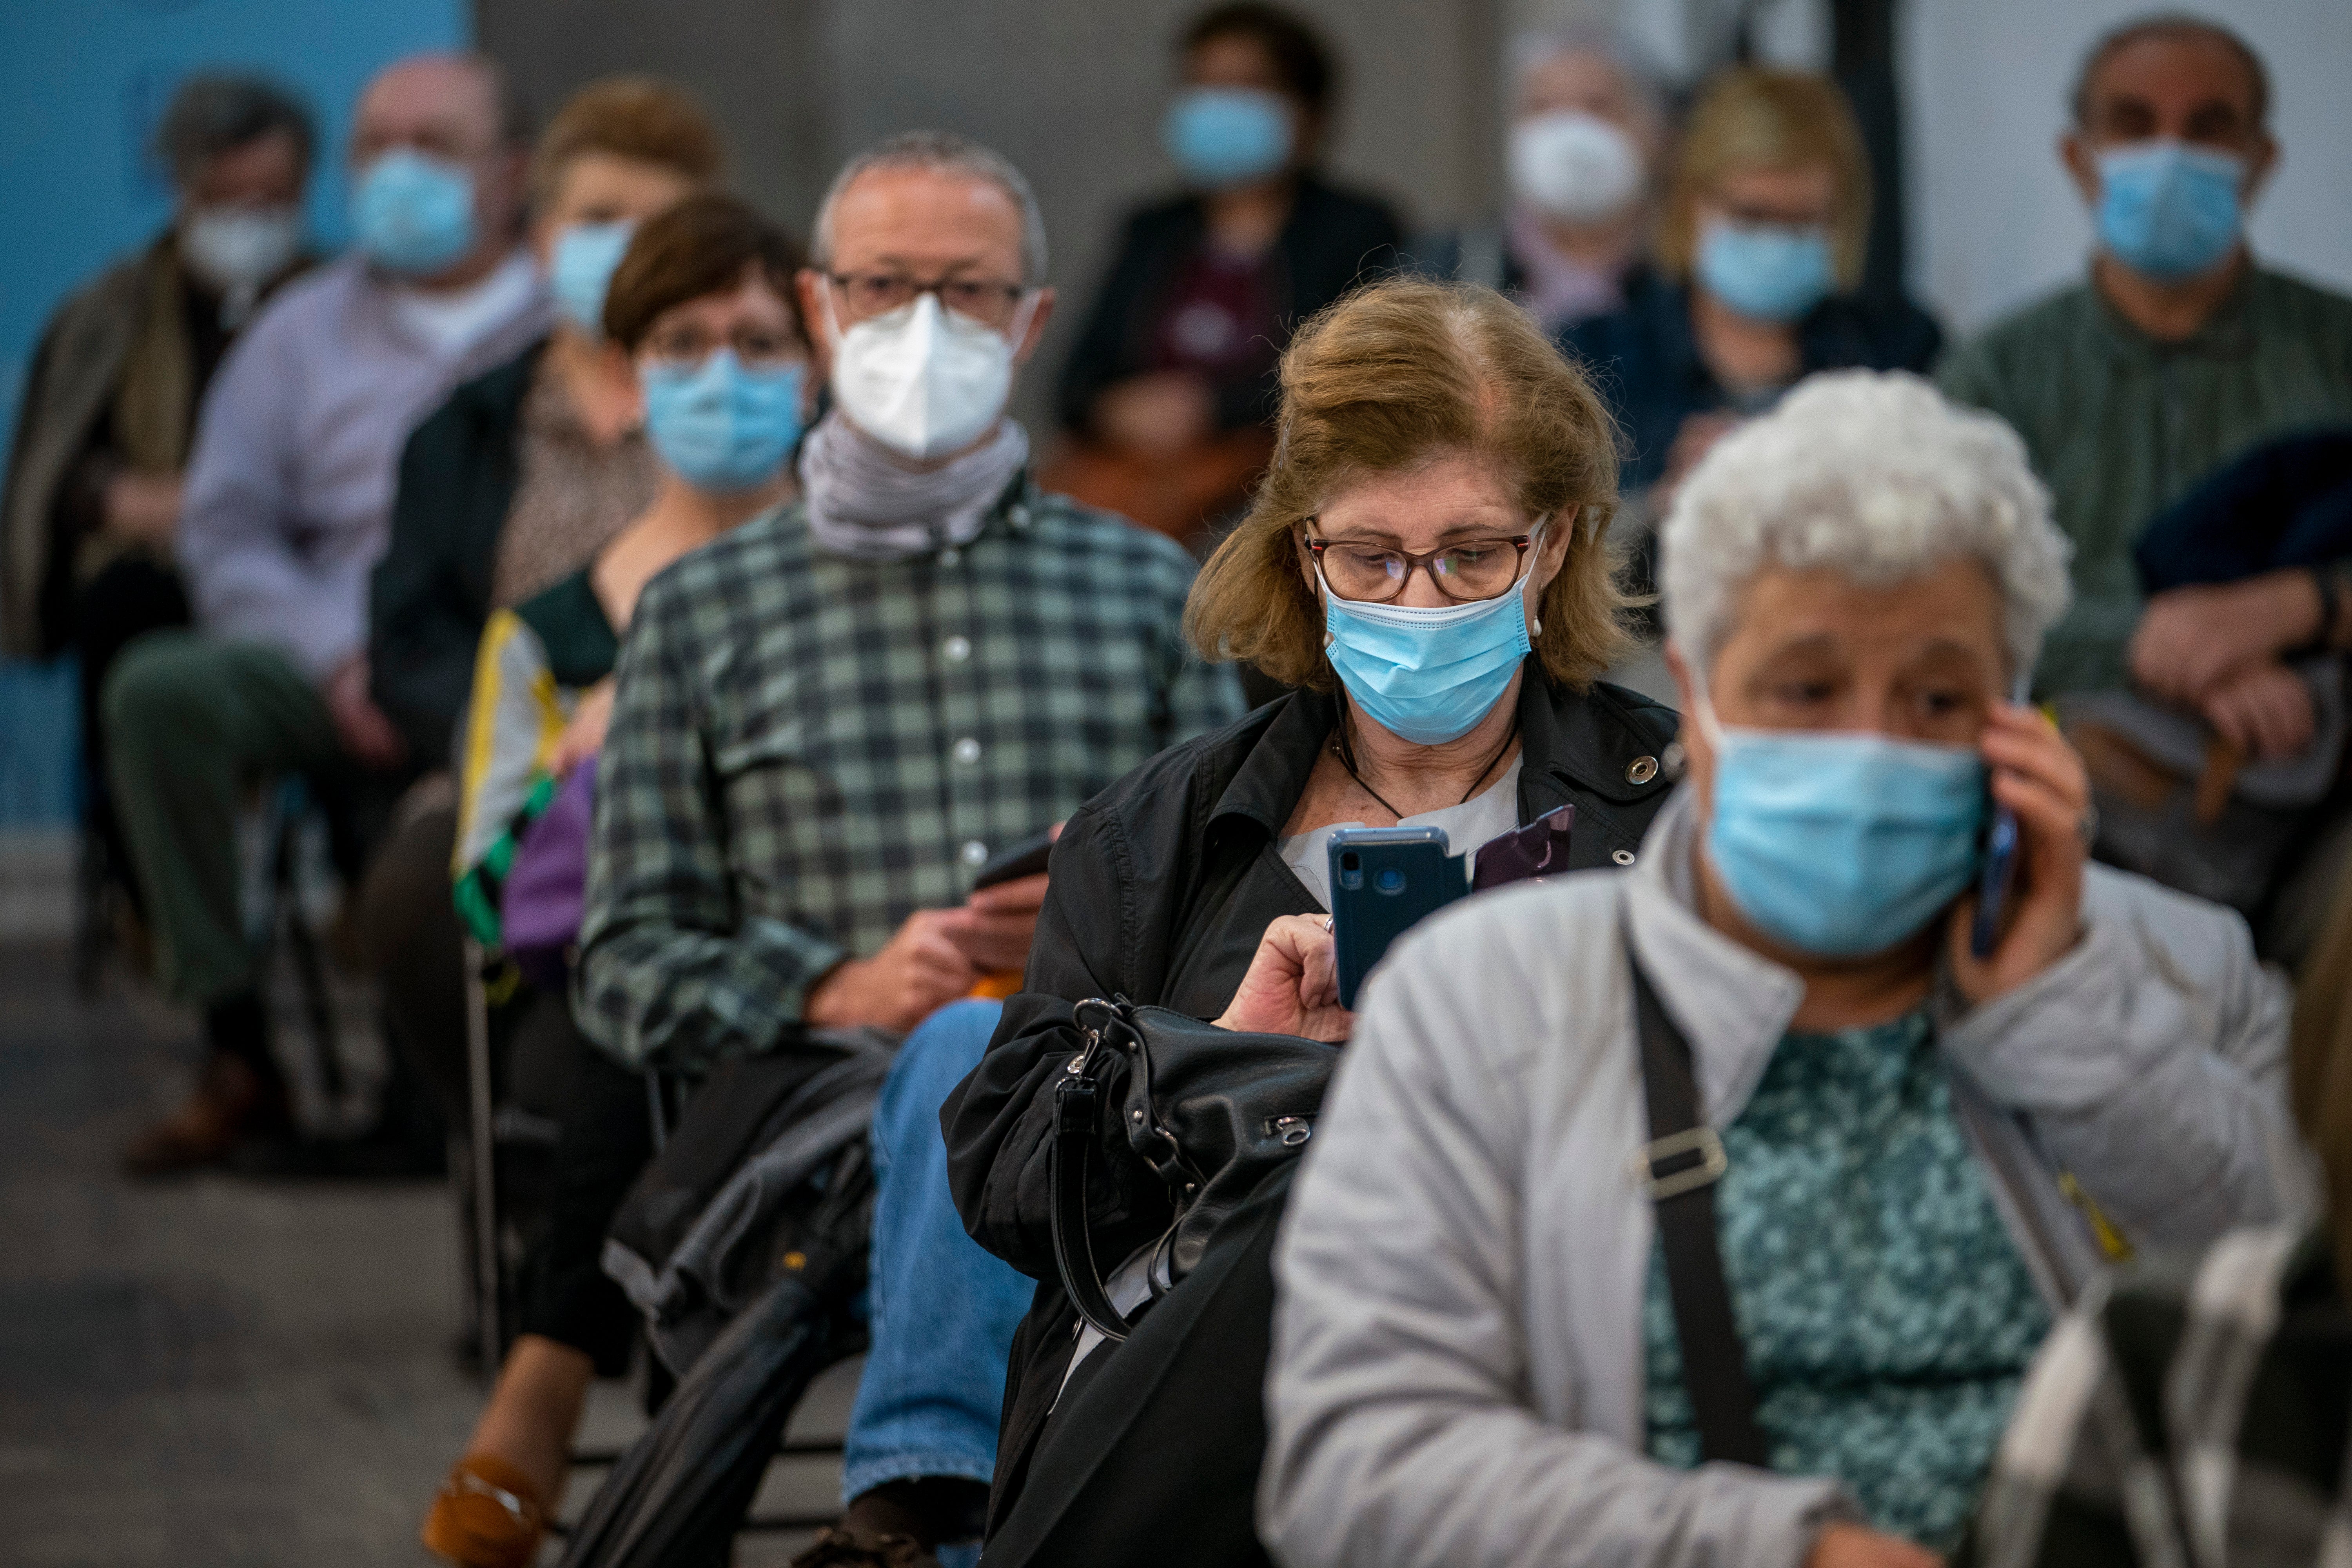 The Covid-19 pandemic has created many challenges for journalists